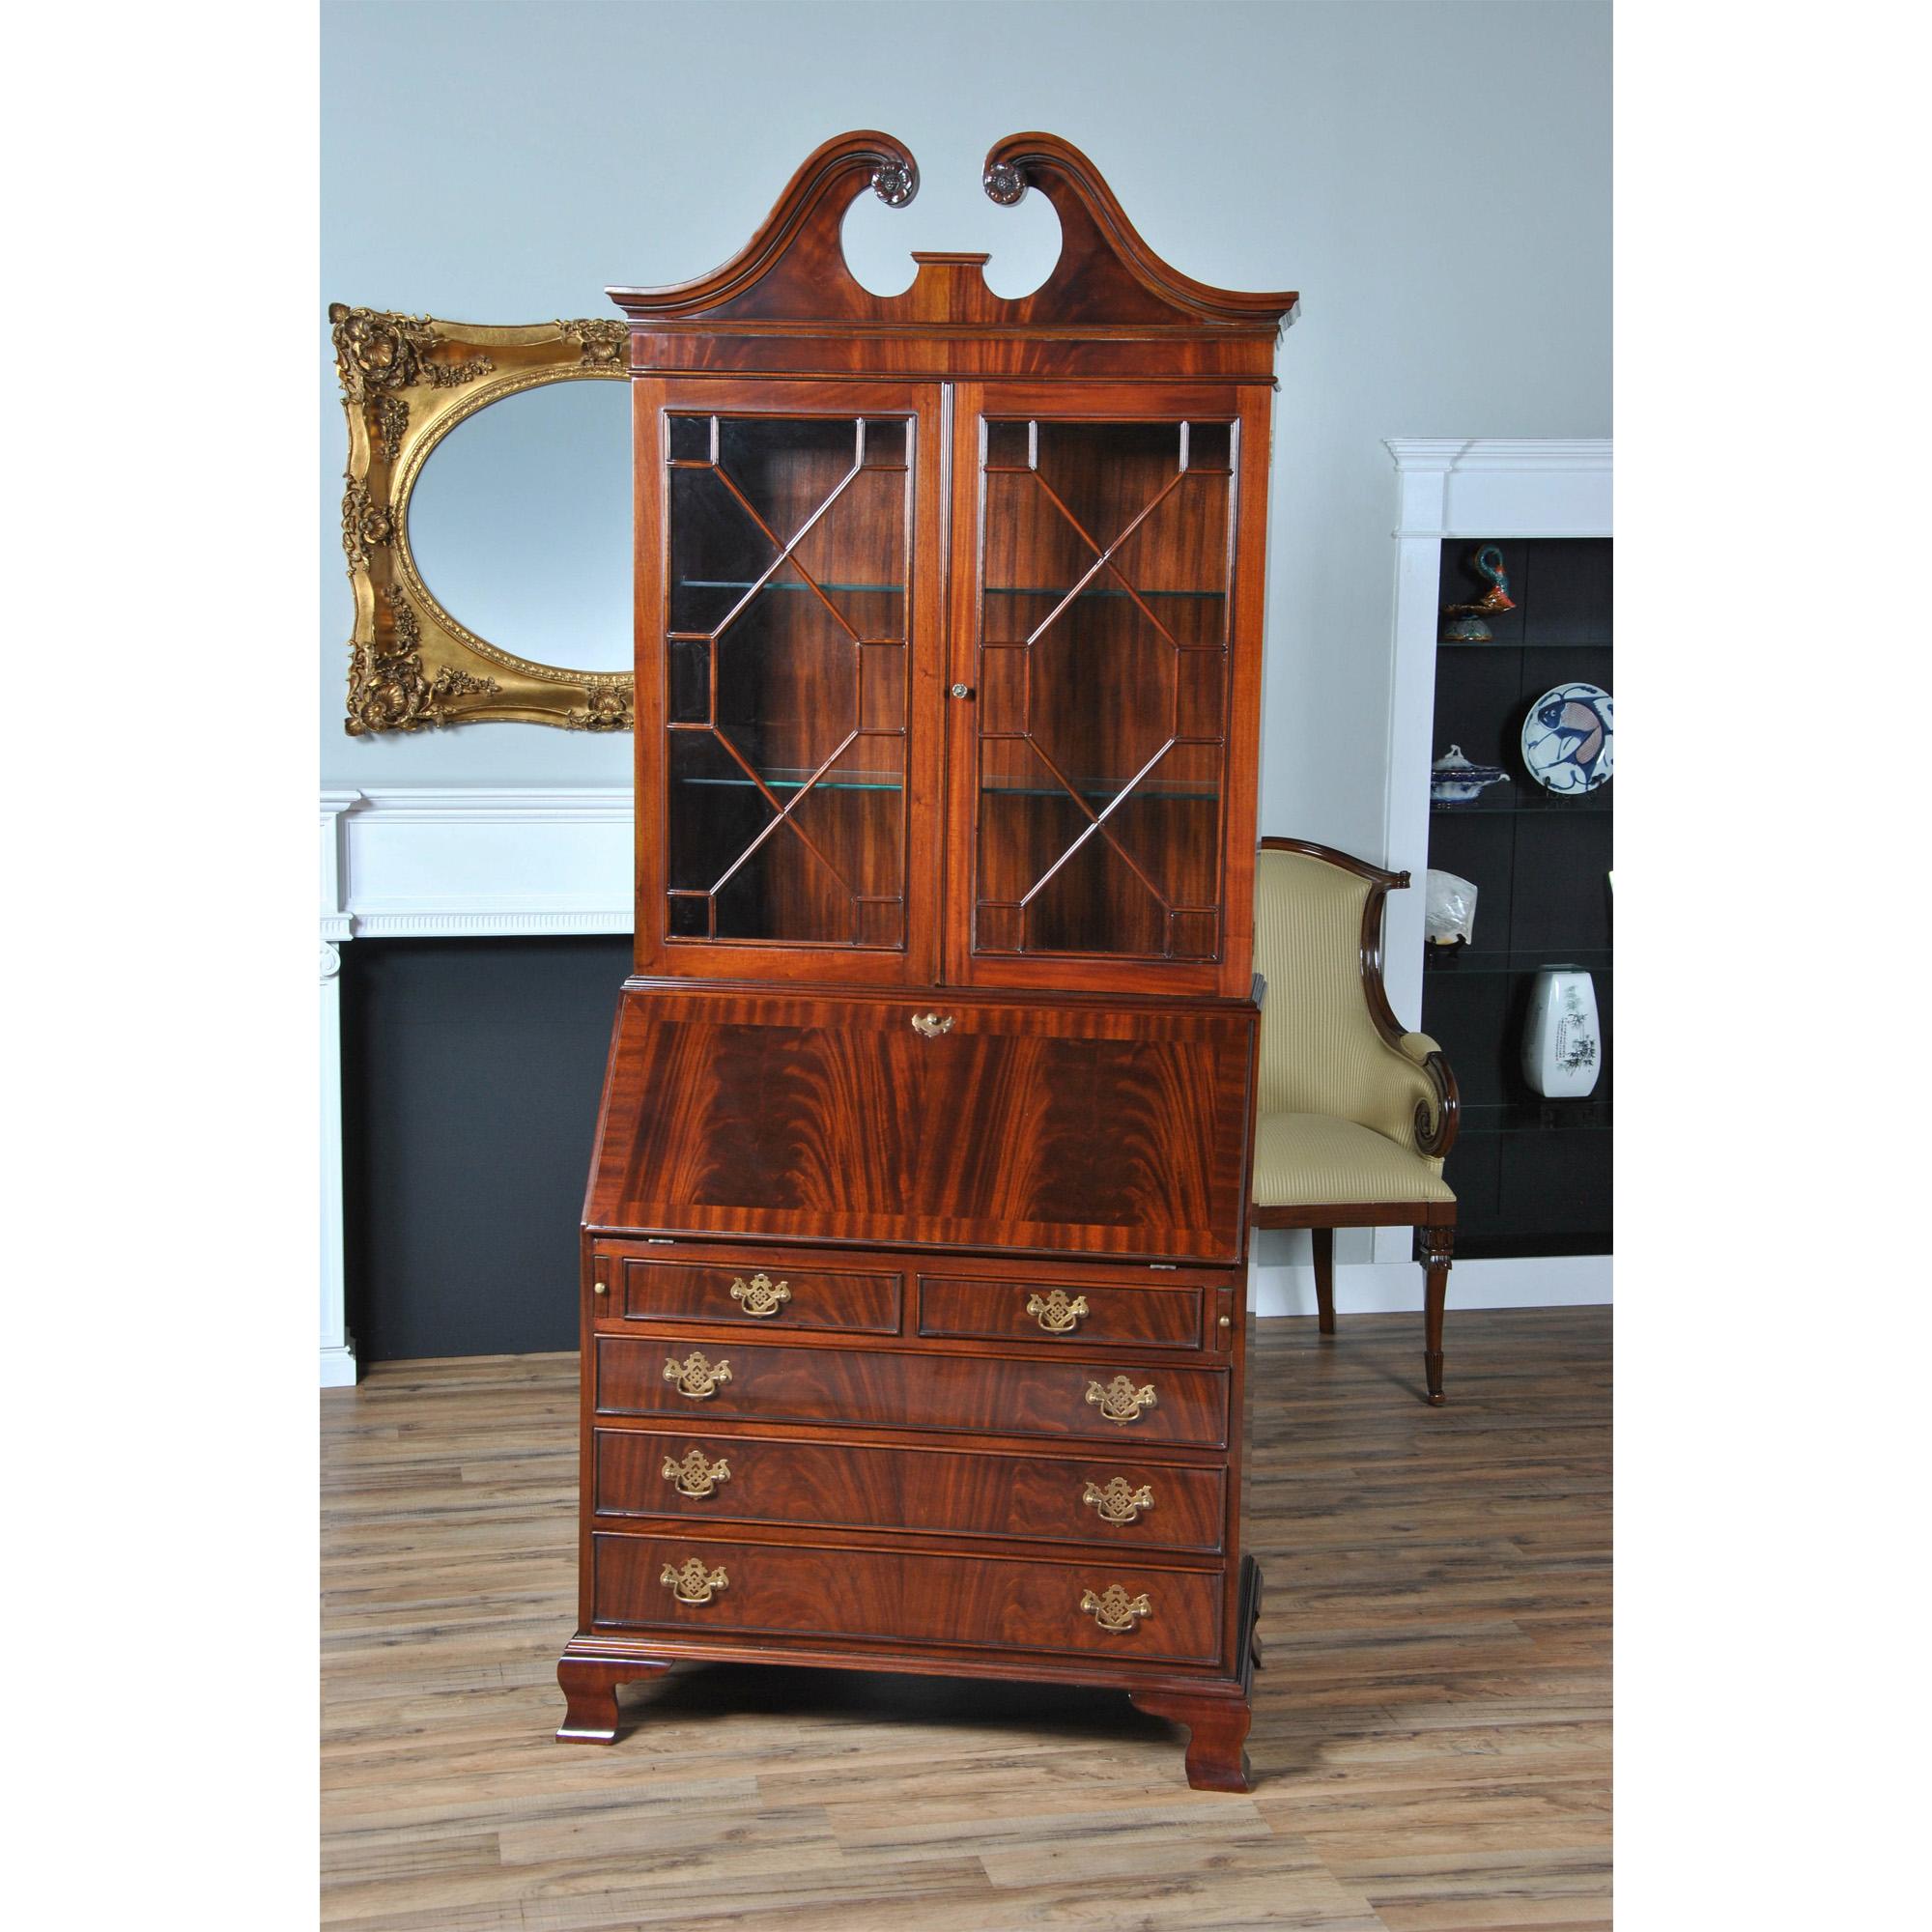 The Mahogany Secretary Desk from Niagara Furniture. This reproduction slant front writing desk has all the outstanding qualities of an antique original. Made of select mahogany solids and veneers the bookcase has a lovely hand carved swan neck,